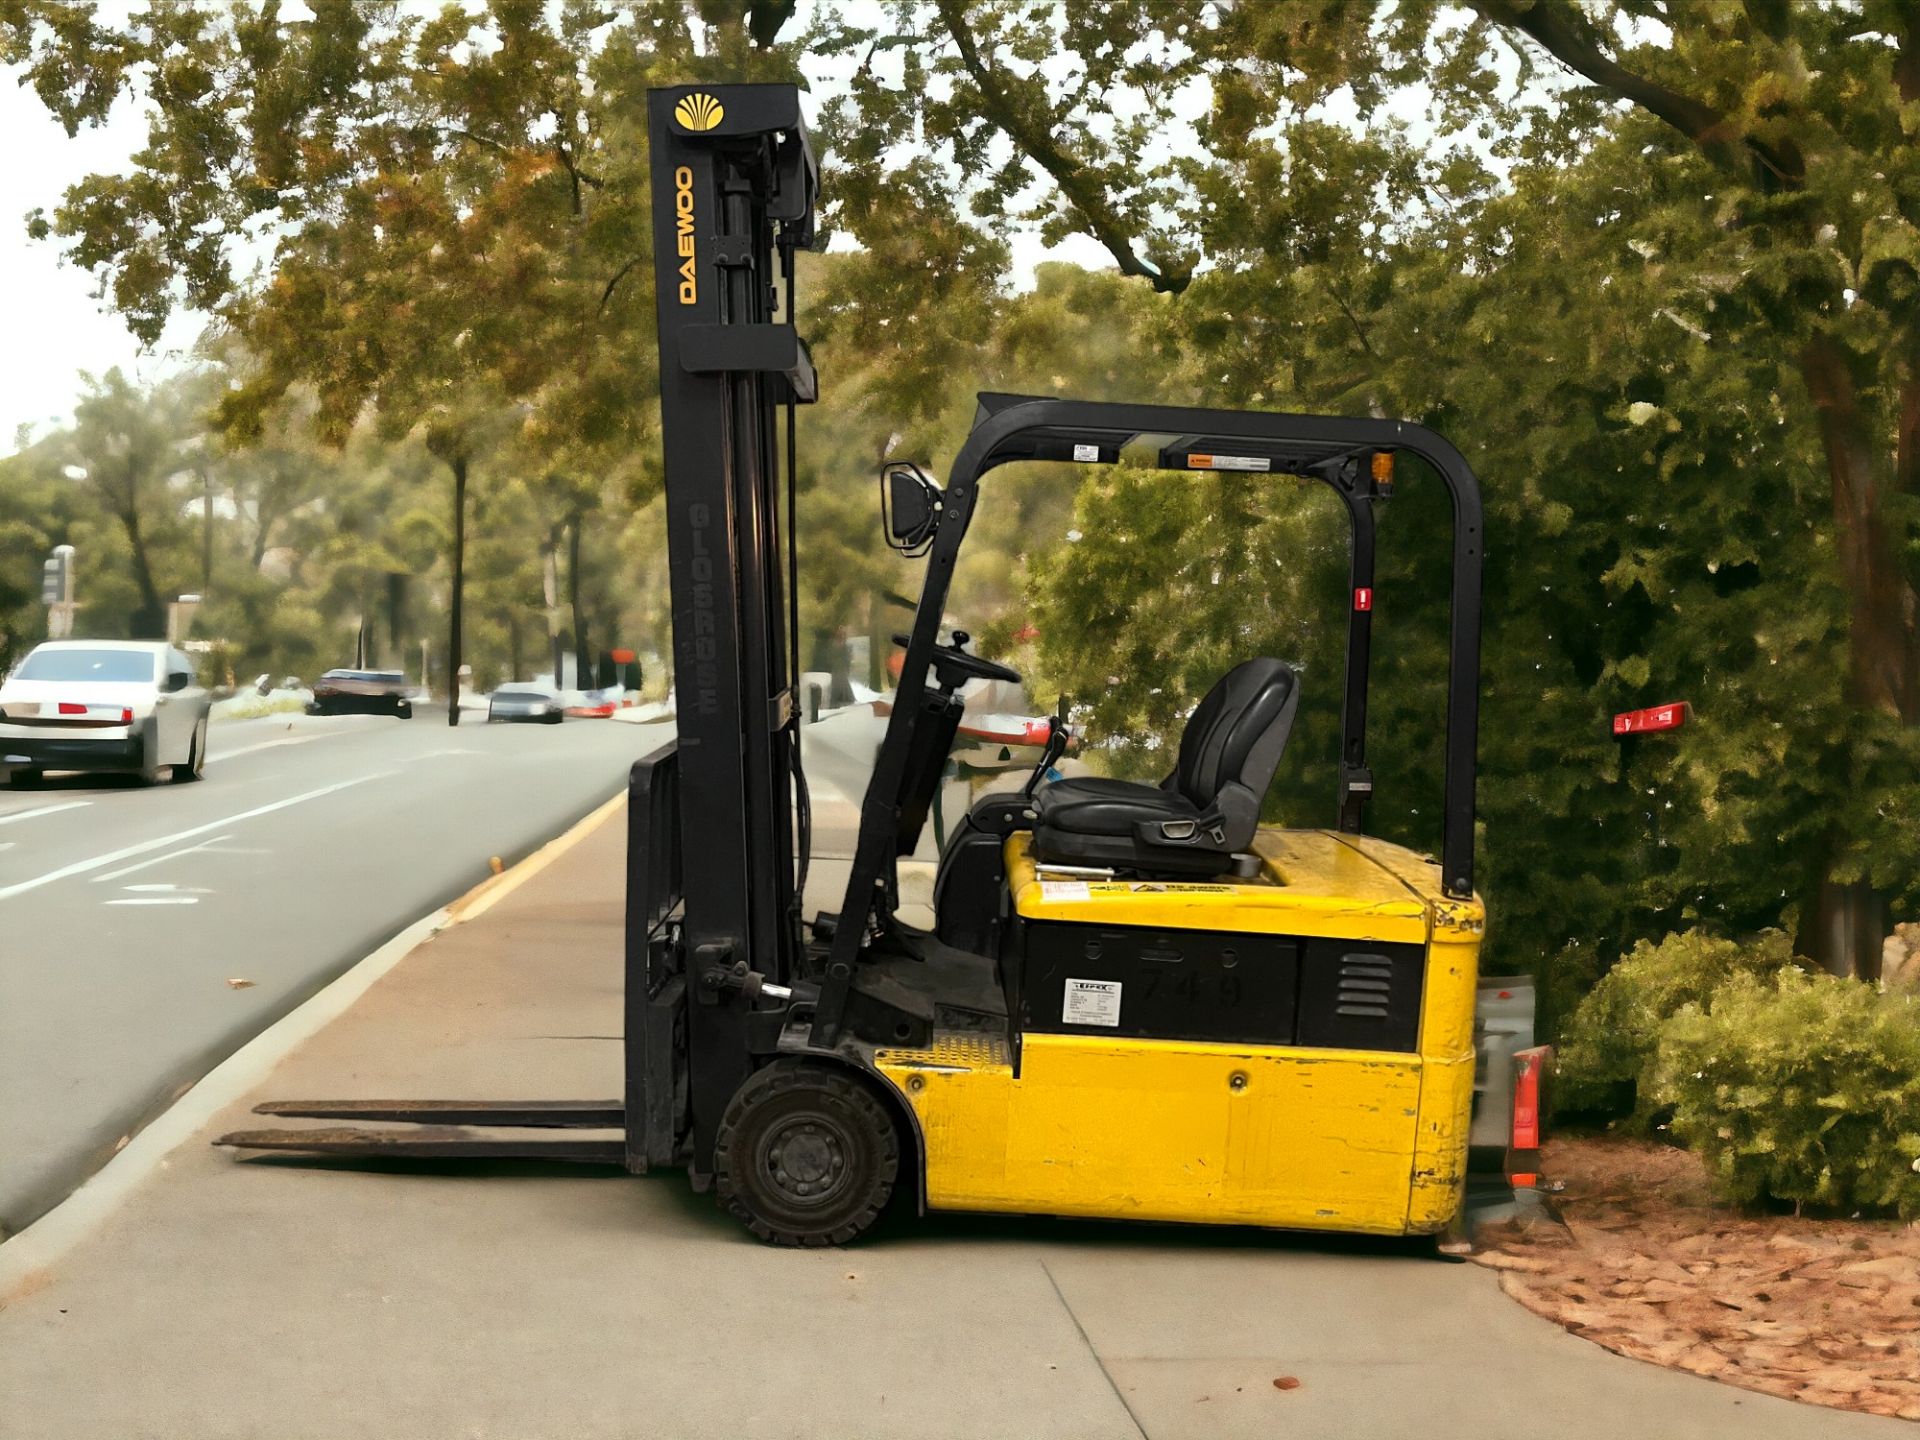 DAEWOO ELECTRIC 3-WHEEL FORKLIFT - MODEL B18T-2 (2002) **(INCLUDES CHARGER)**